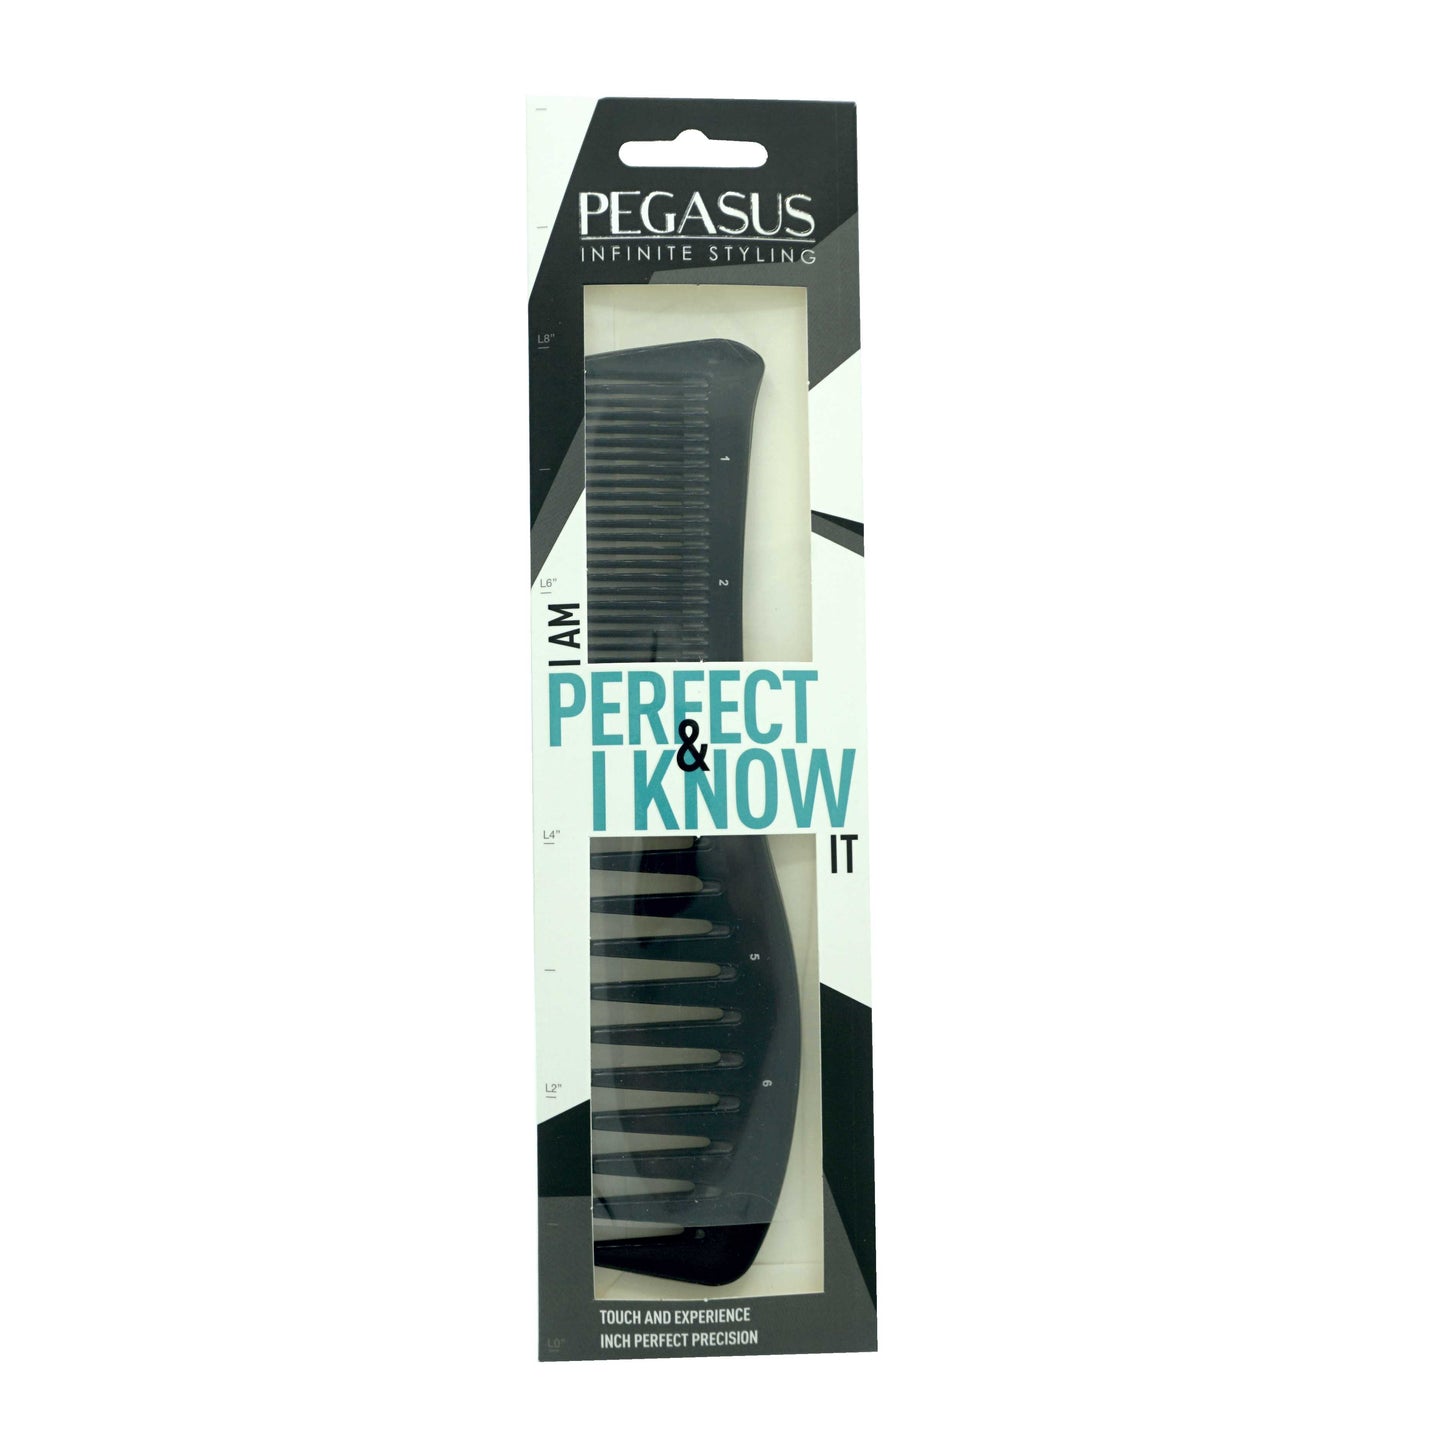 Pegasus 401, 7.75in Hard Rubber Curved Styling Comb, Handmade, Seamless, Smooth Edges, Anti Static, Heat and Chemically Resistant, Wet Hair, Everyday Grooming Comb | Peines de goma dura - Black